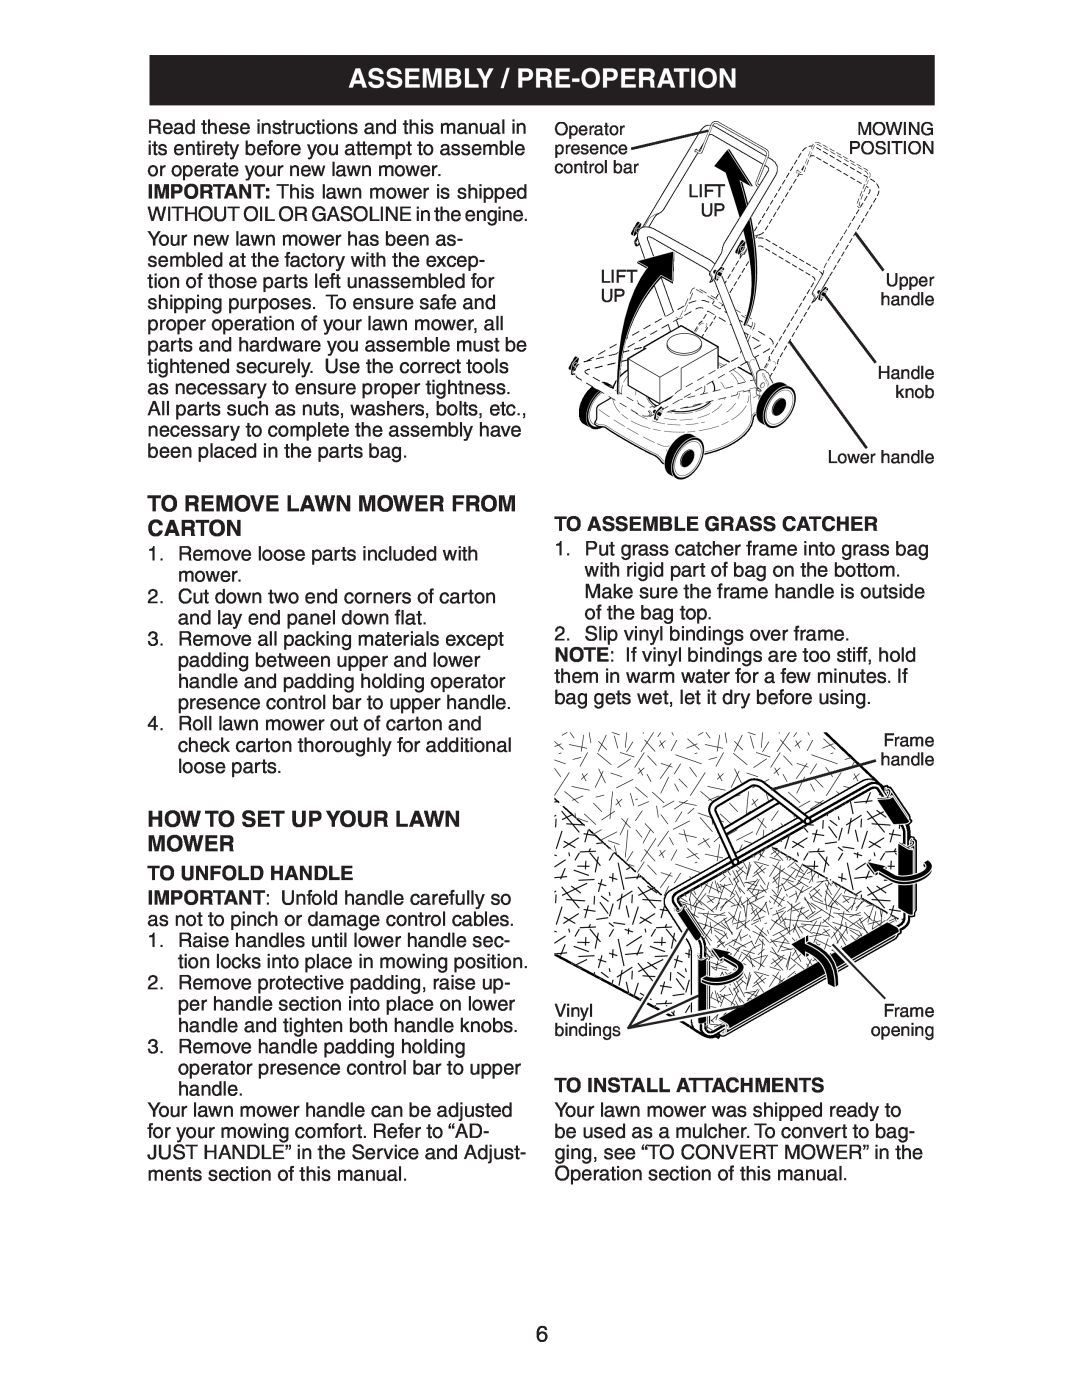 Craftsman 917.38885 owner manual Assembly / Pre-Operation, To Remove Lawn Mower From Carton, How To Set Up Your Lawn Mower 